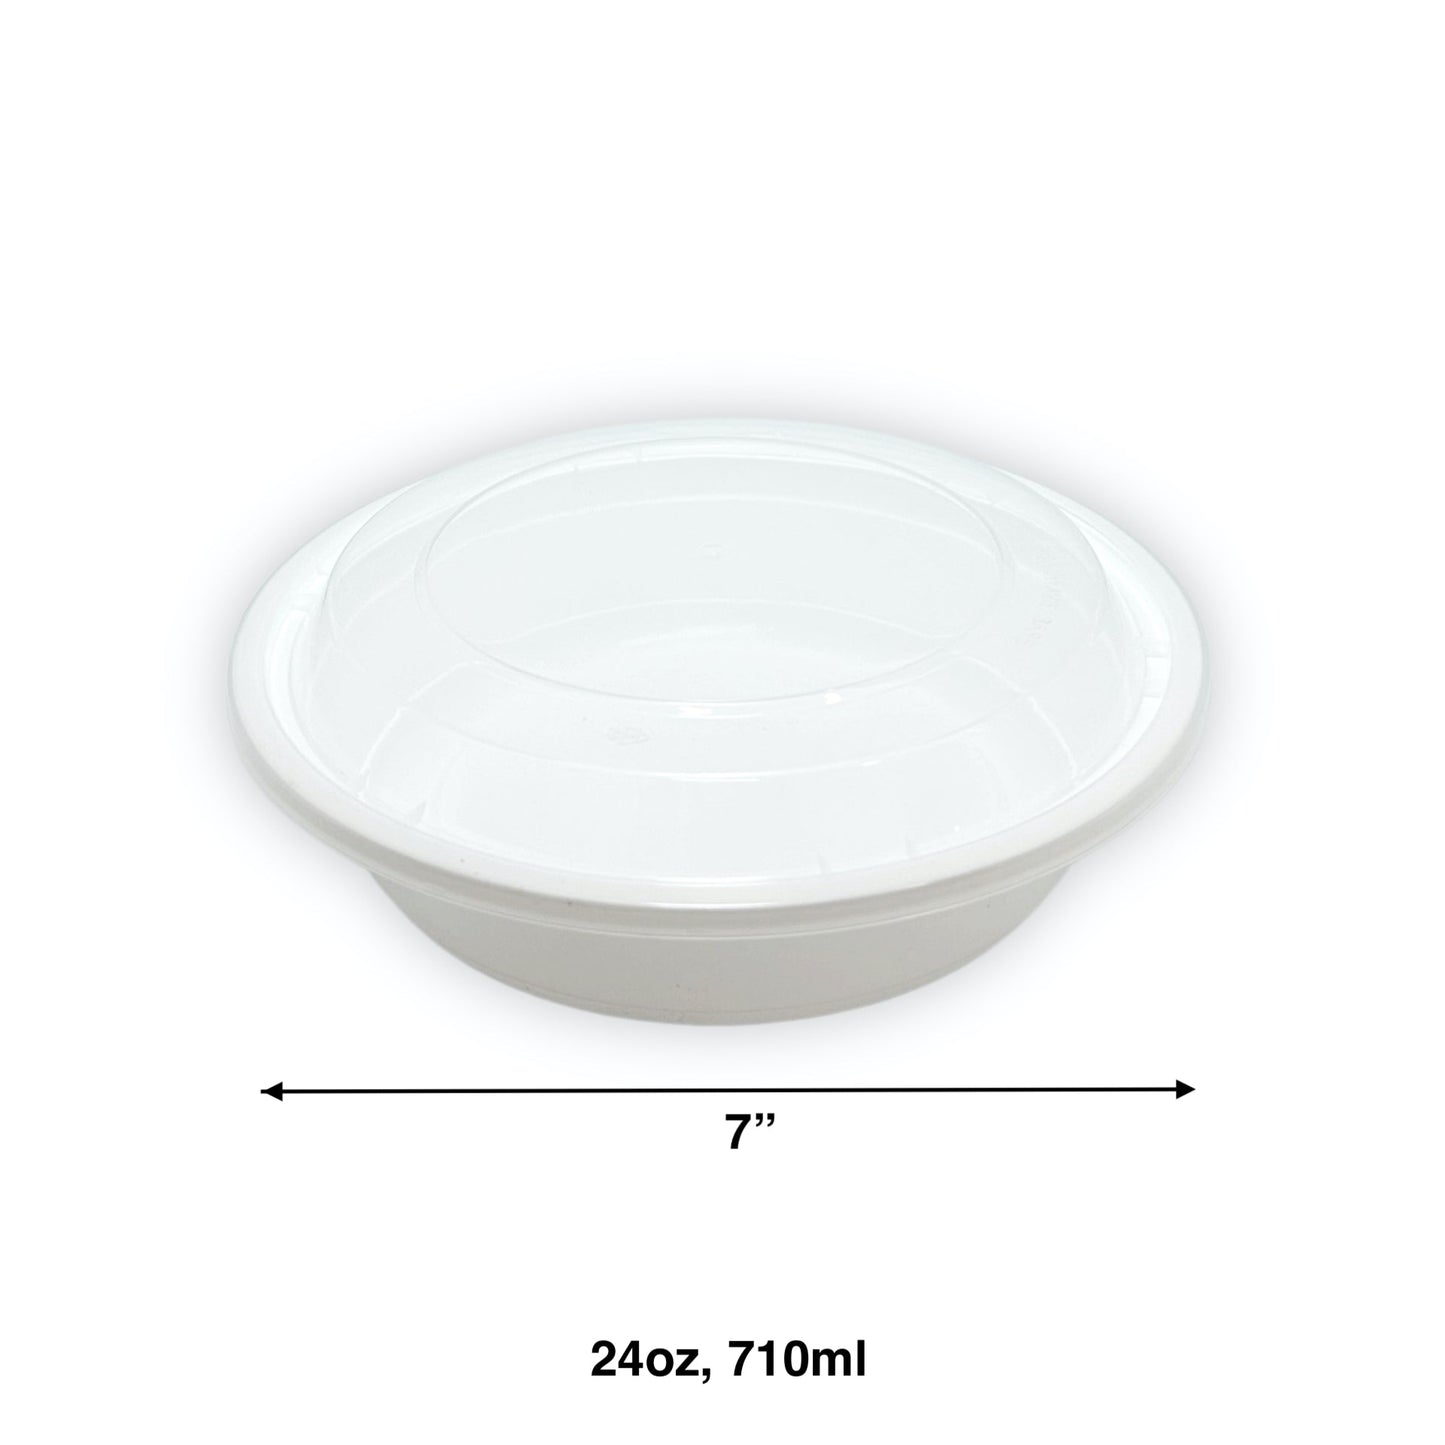 KIS-RS24G | 150sets 24oz, 710ml White PP Round 7" Container with Clear Lids Combo; $0.151/set